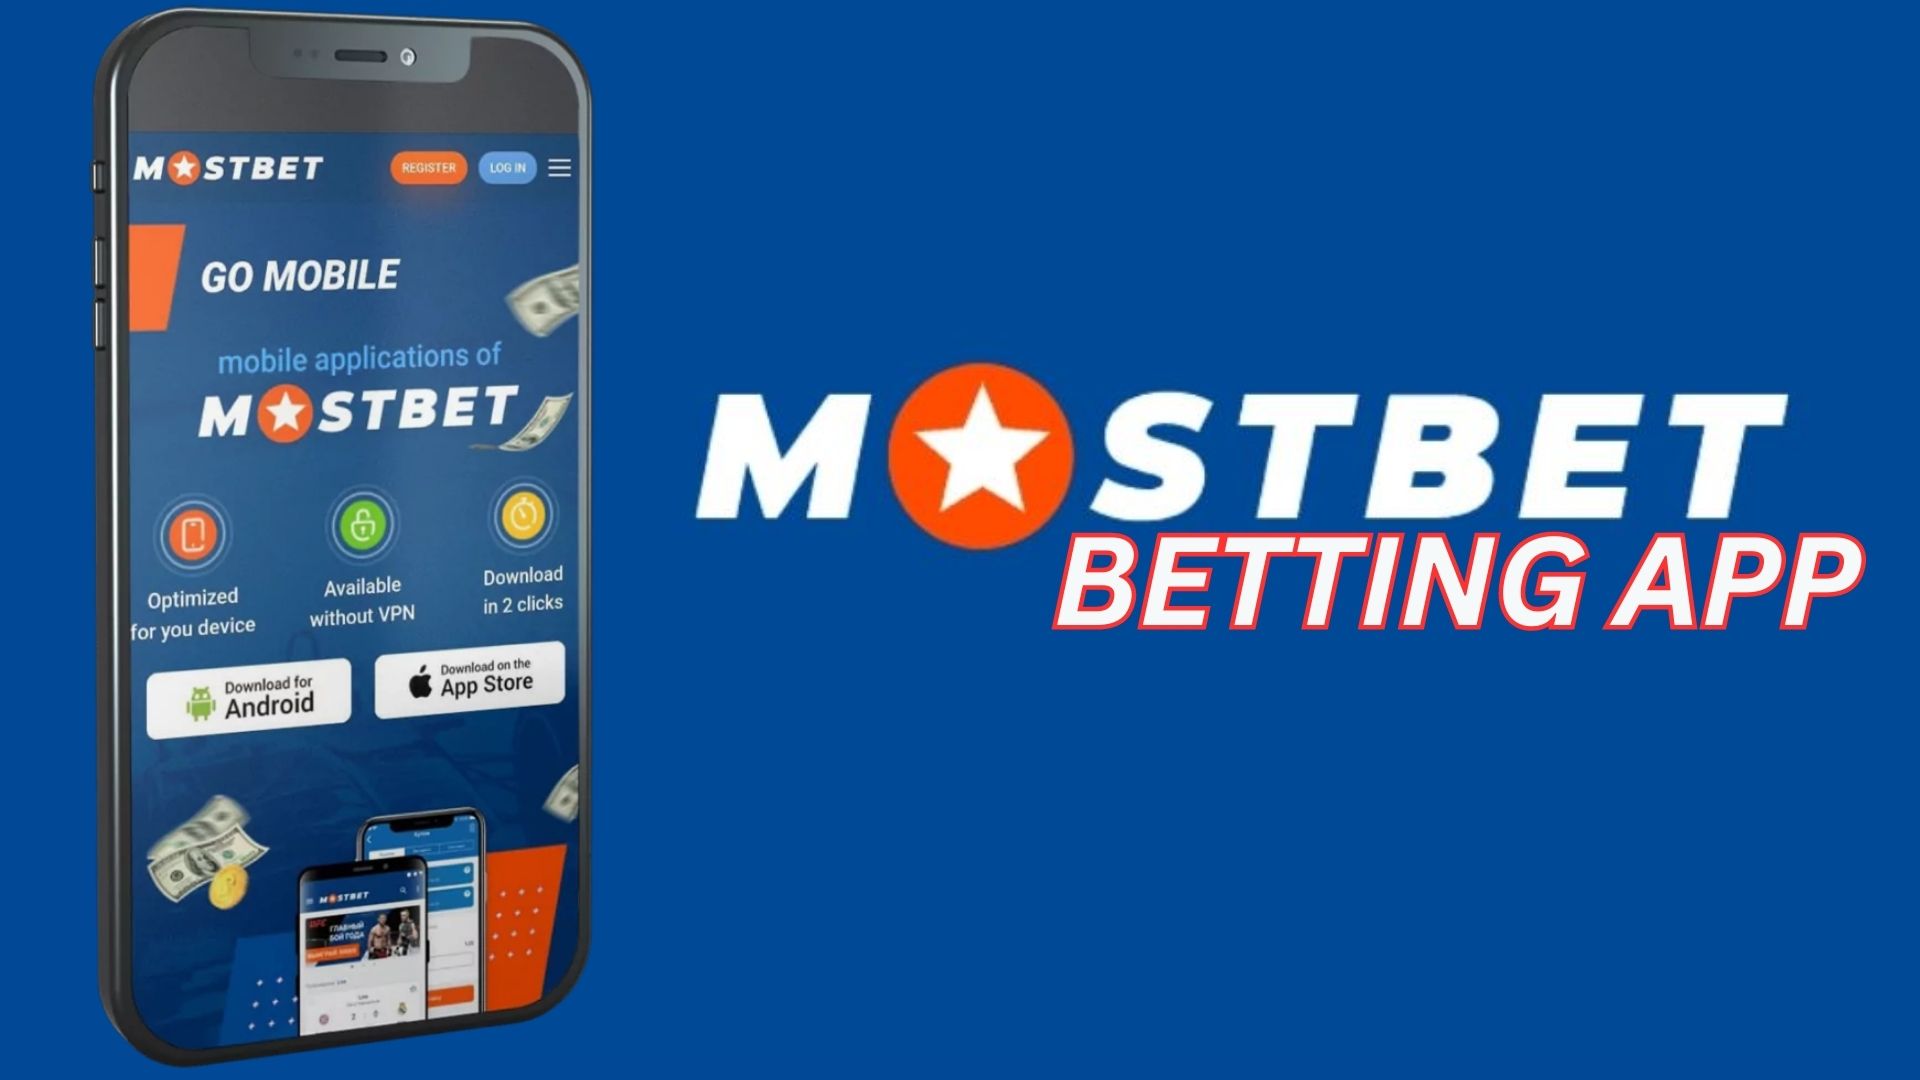 21 New Age Ways To Mostbet-27 Betting company and Casino in Turkey